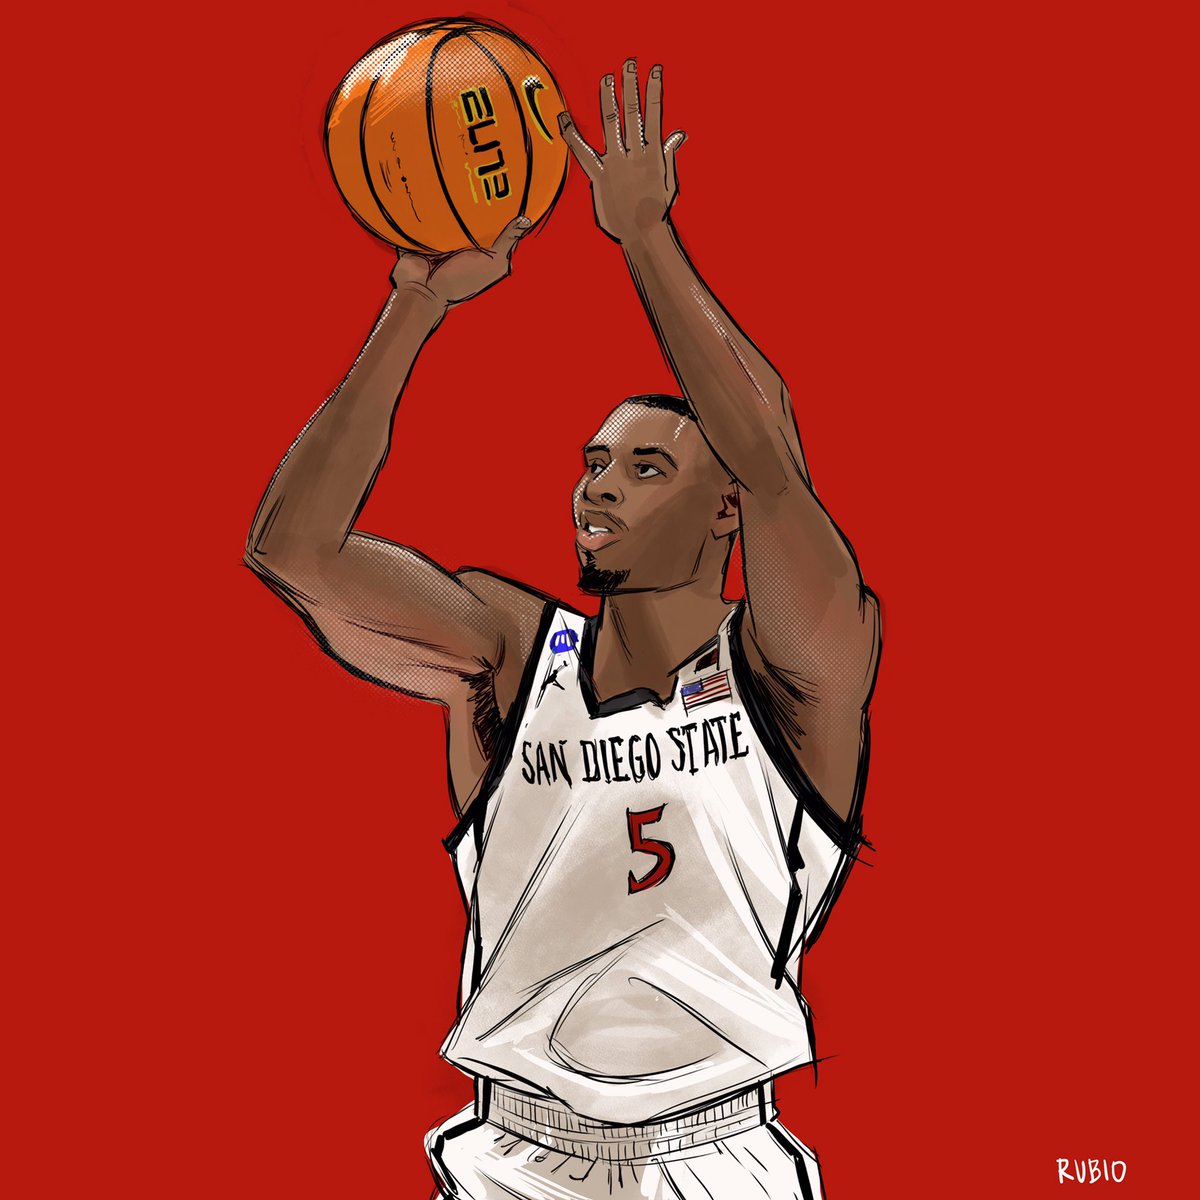 BUZZER BEATER
Here’s your drawing of #LamontButler!
That #FinalFour game was amazing!
#SanDiegoStateBasketball
So happy for #SanDiegoStateUniversity #SDSUAlumni and my beloved hometown of #SanDiego!
#Aztecs go on to the #NationalChampionship
#NCAAChampionship
GO AZTECS! 🟥⬛️🟥⬛️